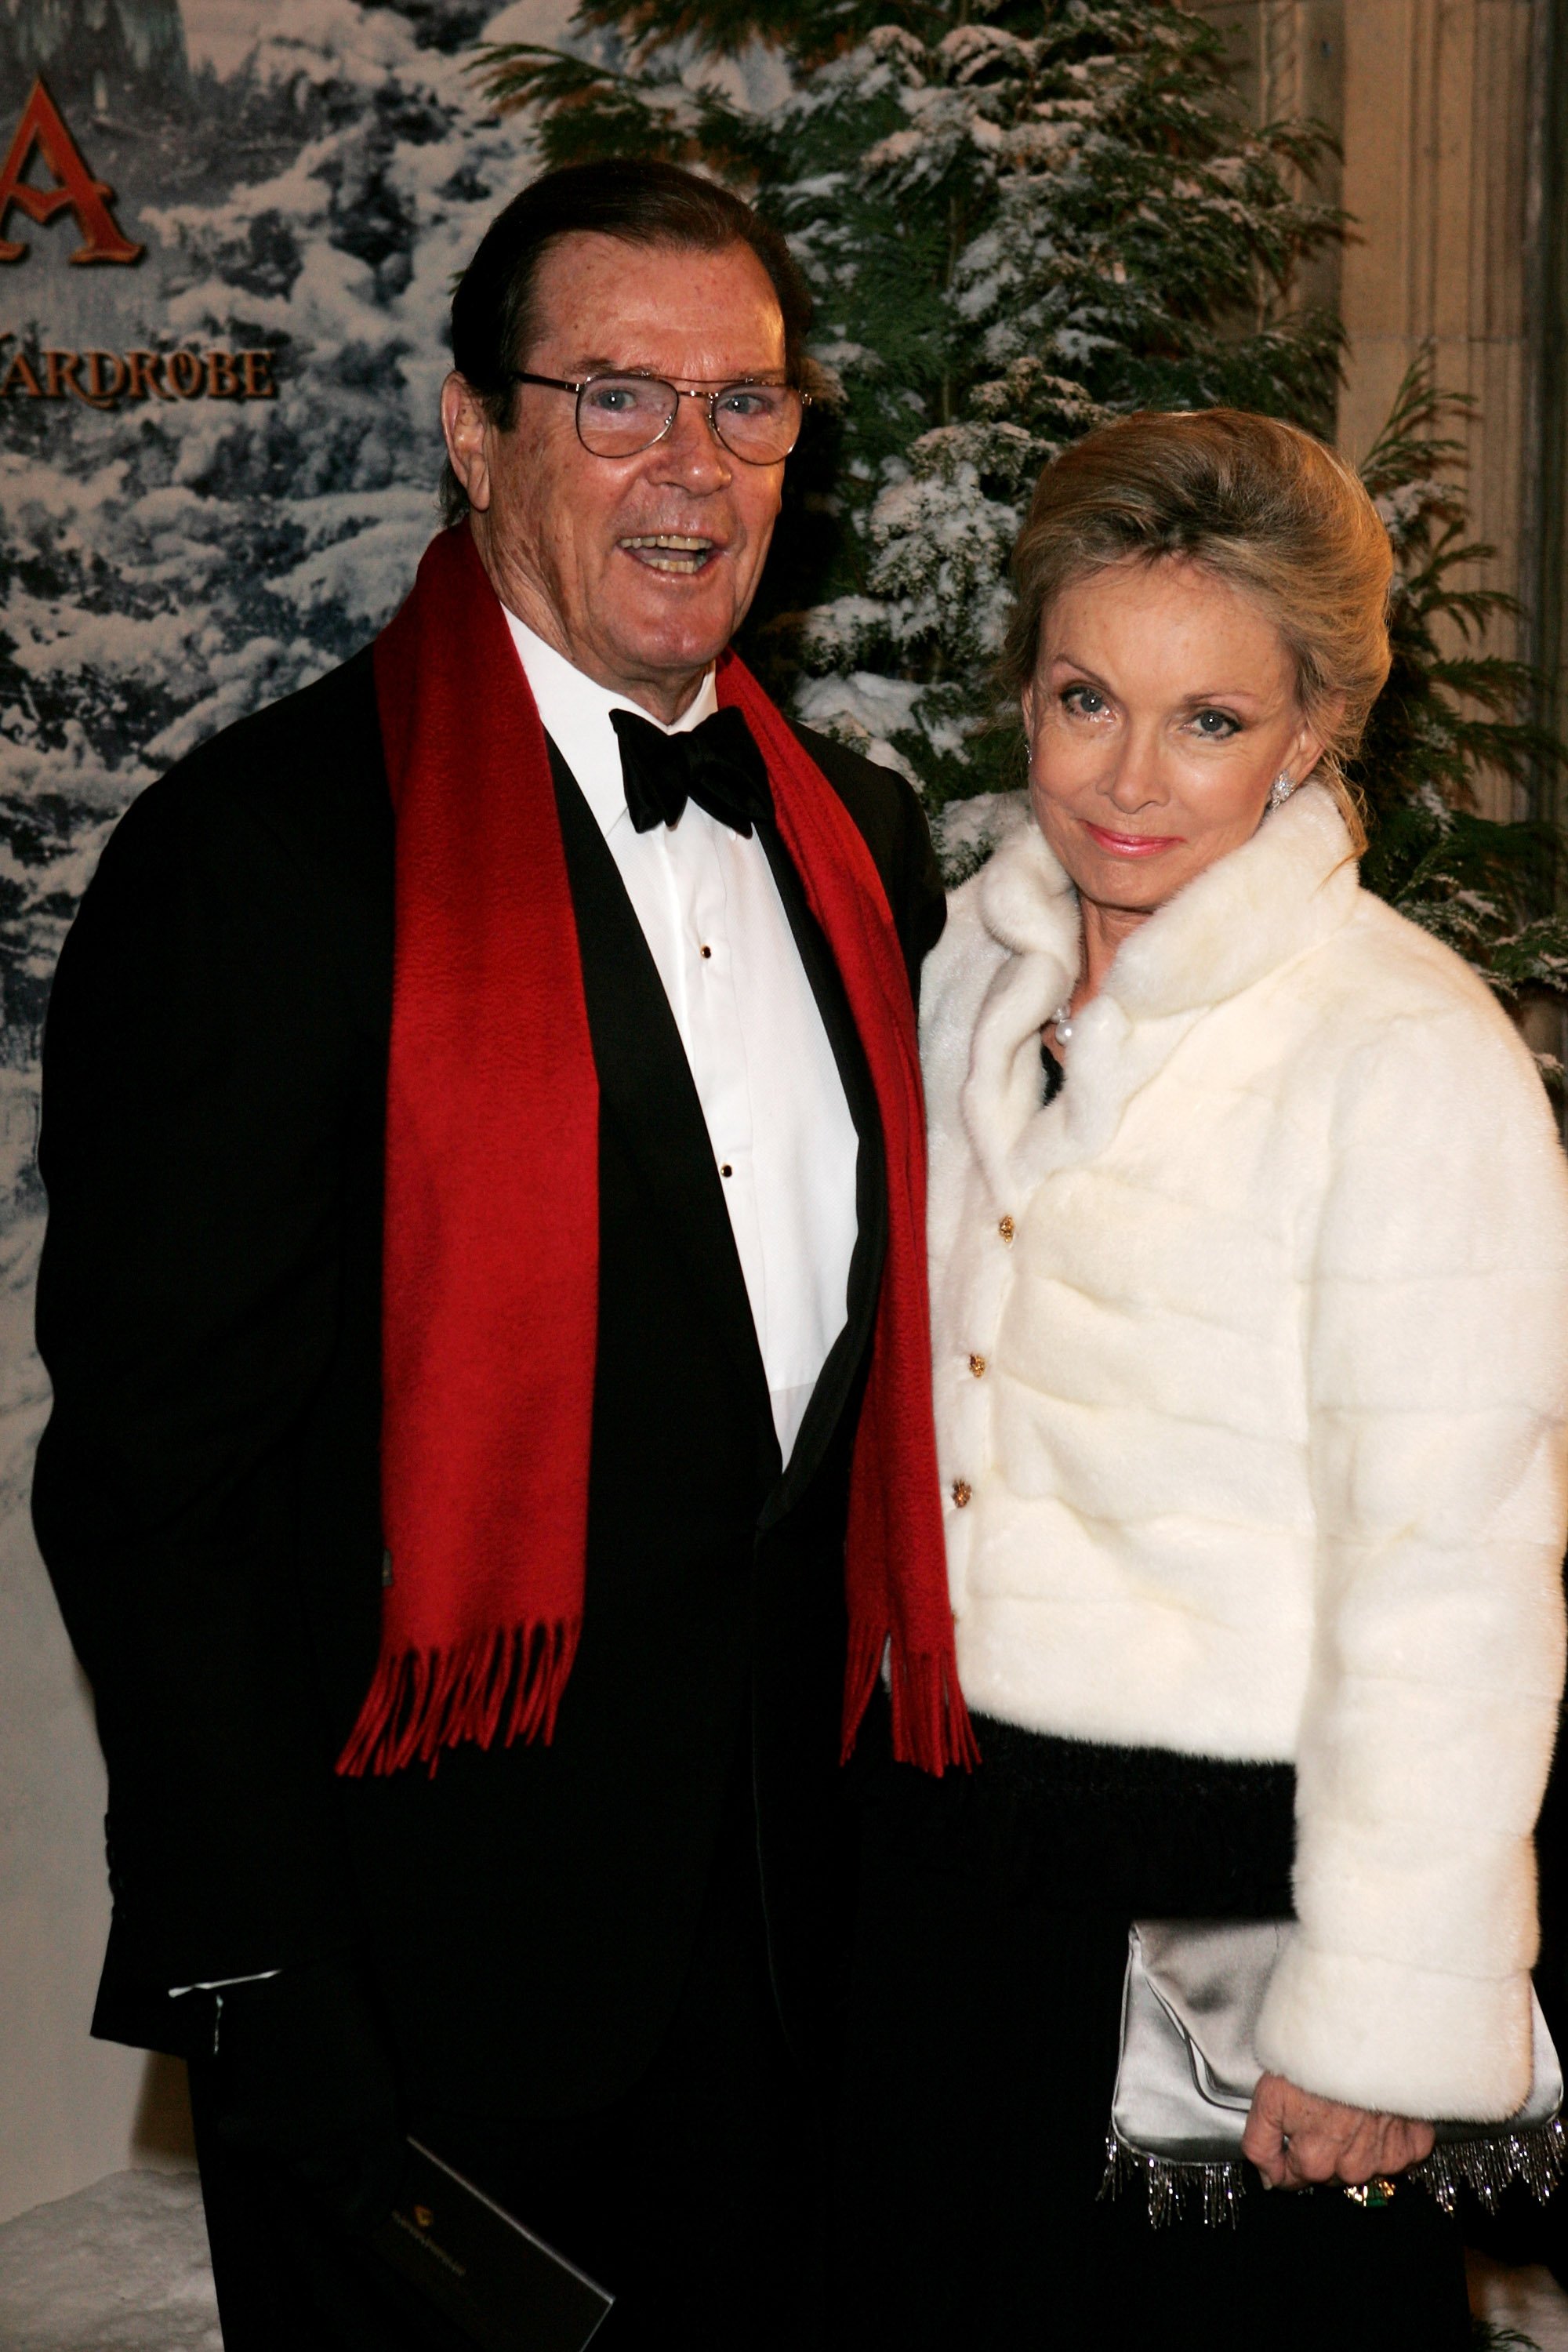 Actor Roger Moore and his wife Christina "Kiki" Tholstrup arrive at the Royal Film Performance and World Premiere of "The Chronicles Of Narnia" at the Royal Albert Hall on December 7, 2005 in London, England | Source: Getty Images